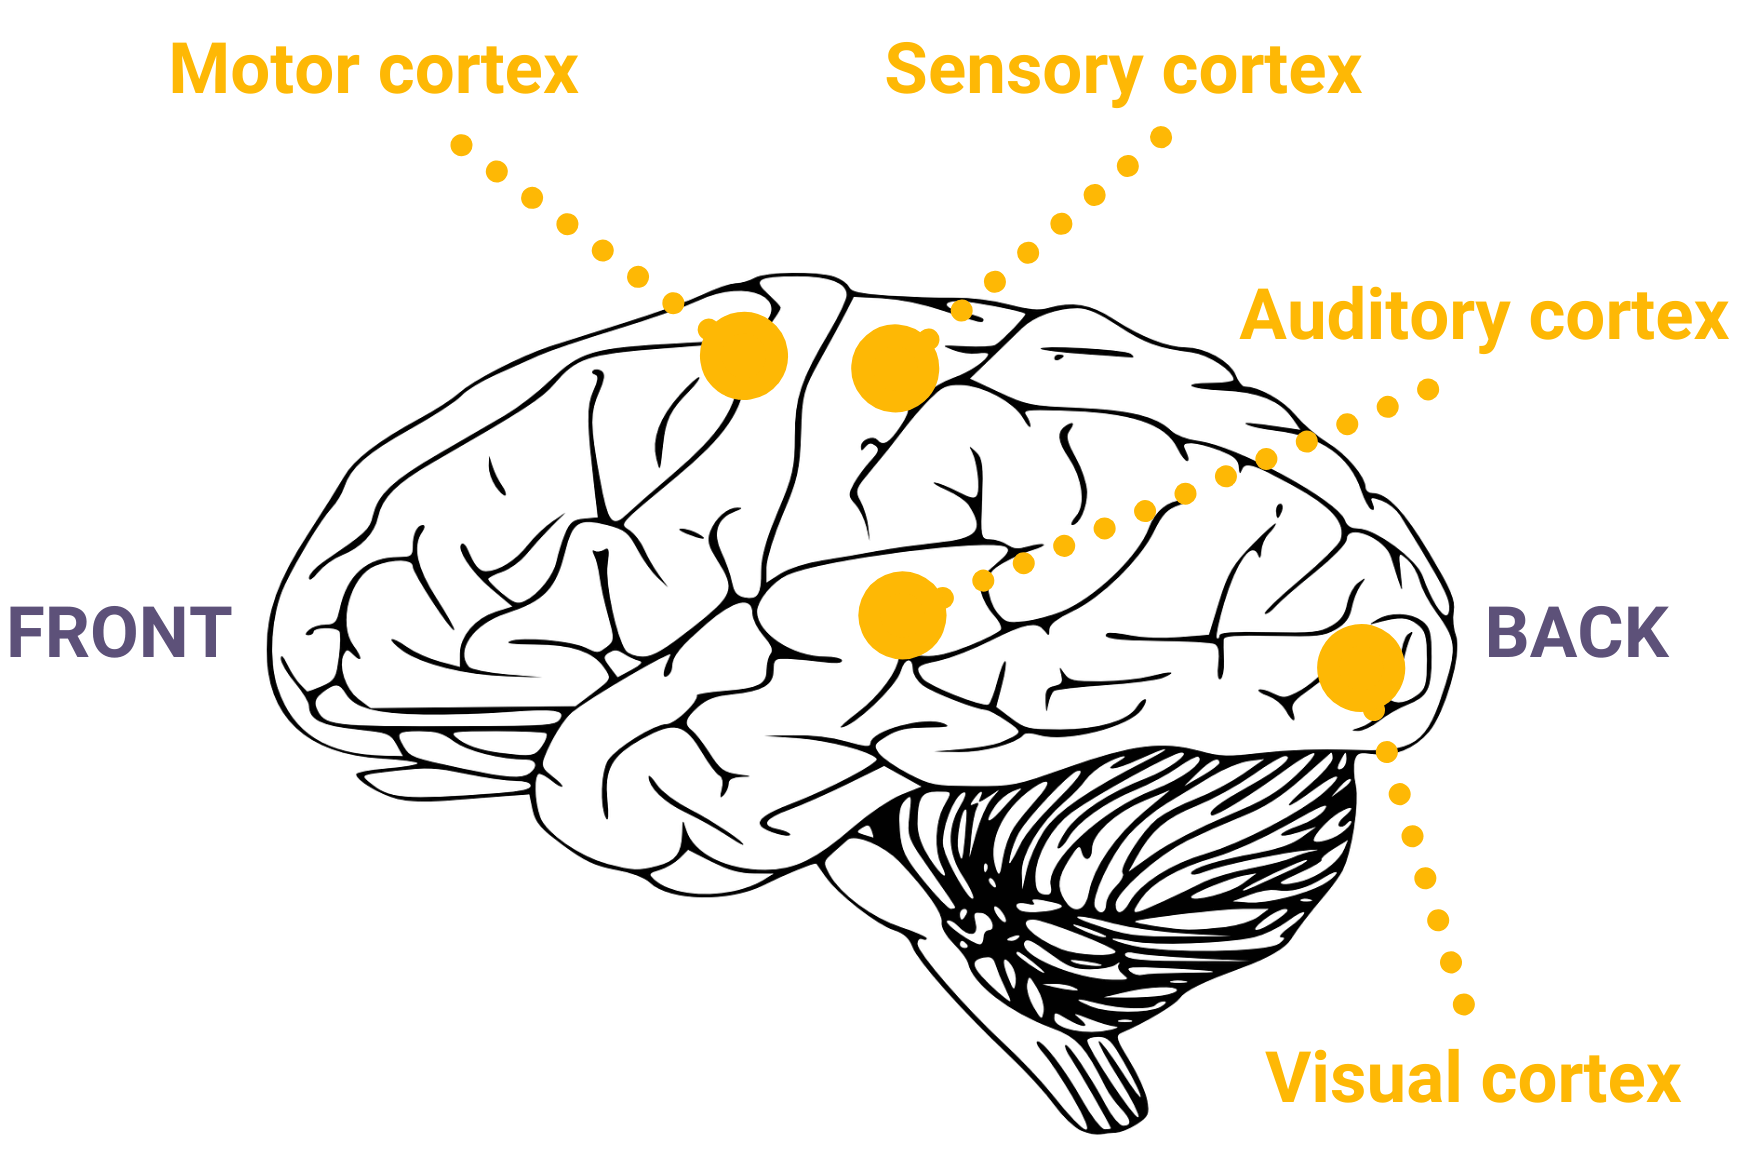 localisation of function within the brain